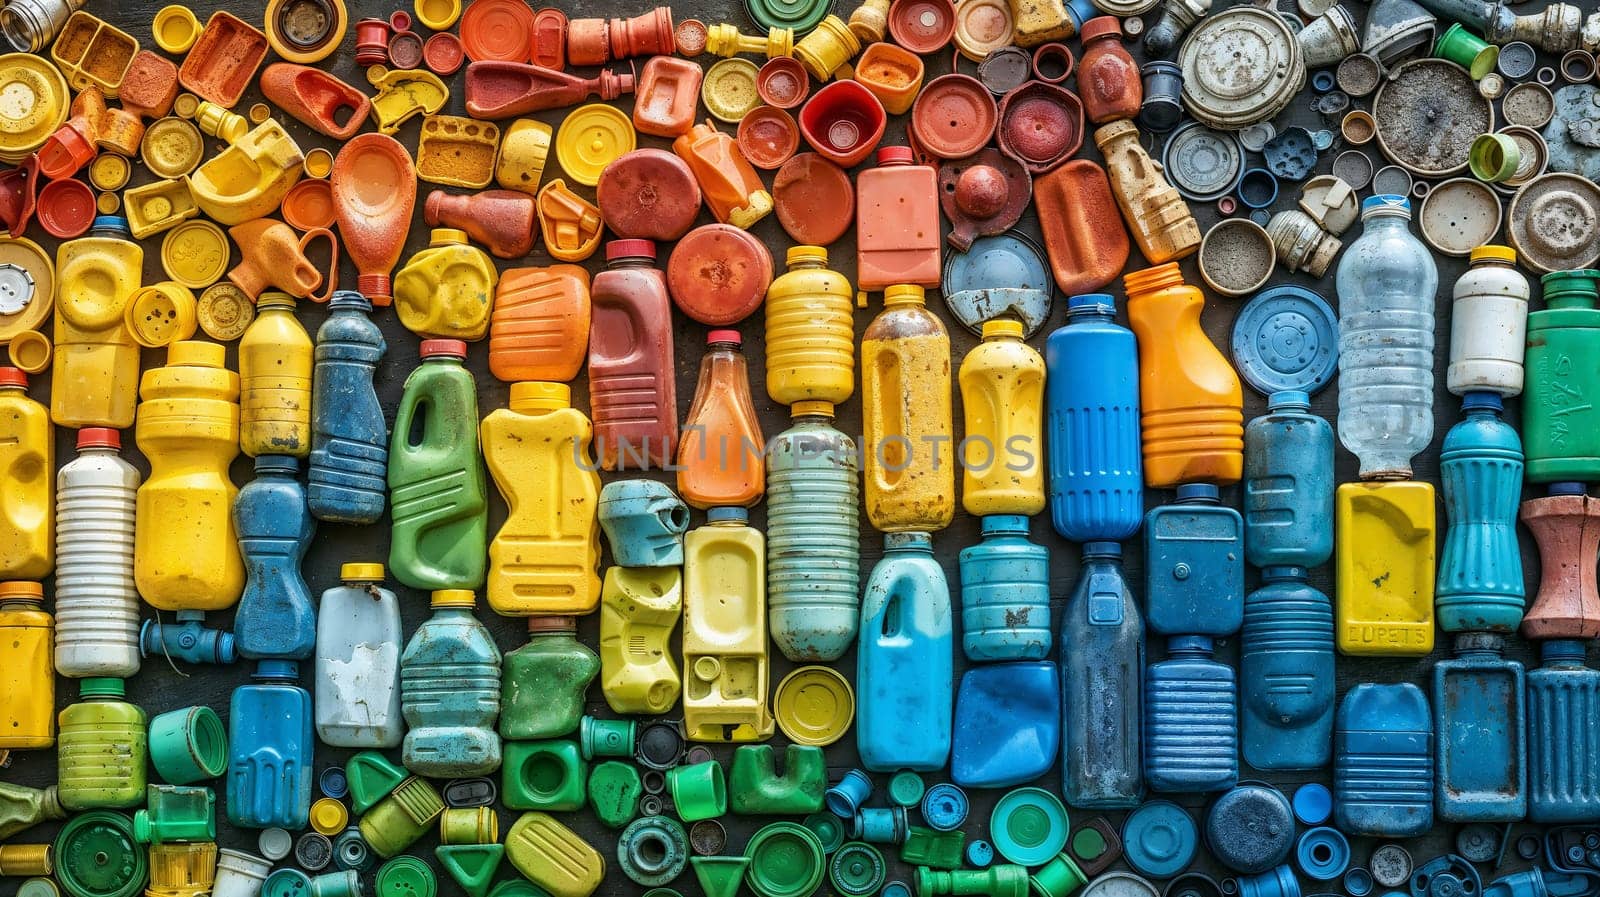 A vibrant collection of assorted plastic containers and closures, showcasing the variety of plastic waste typically destined for recycling.